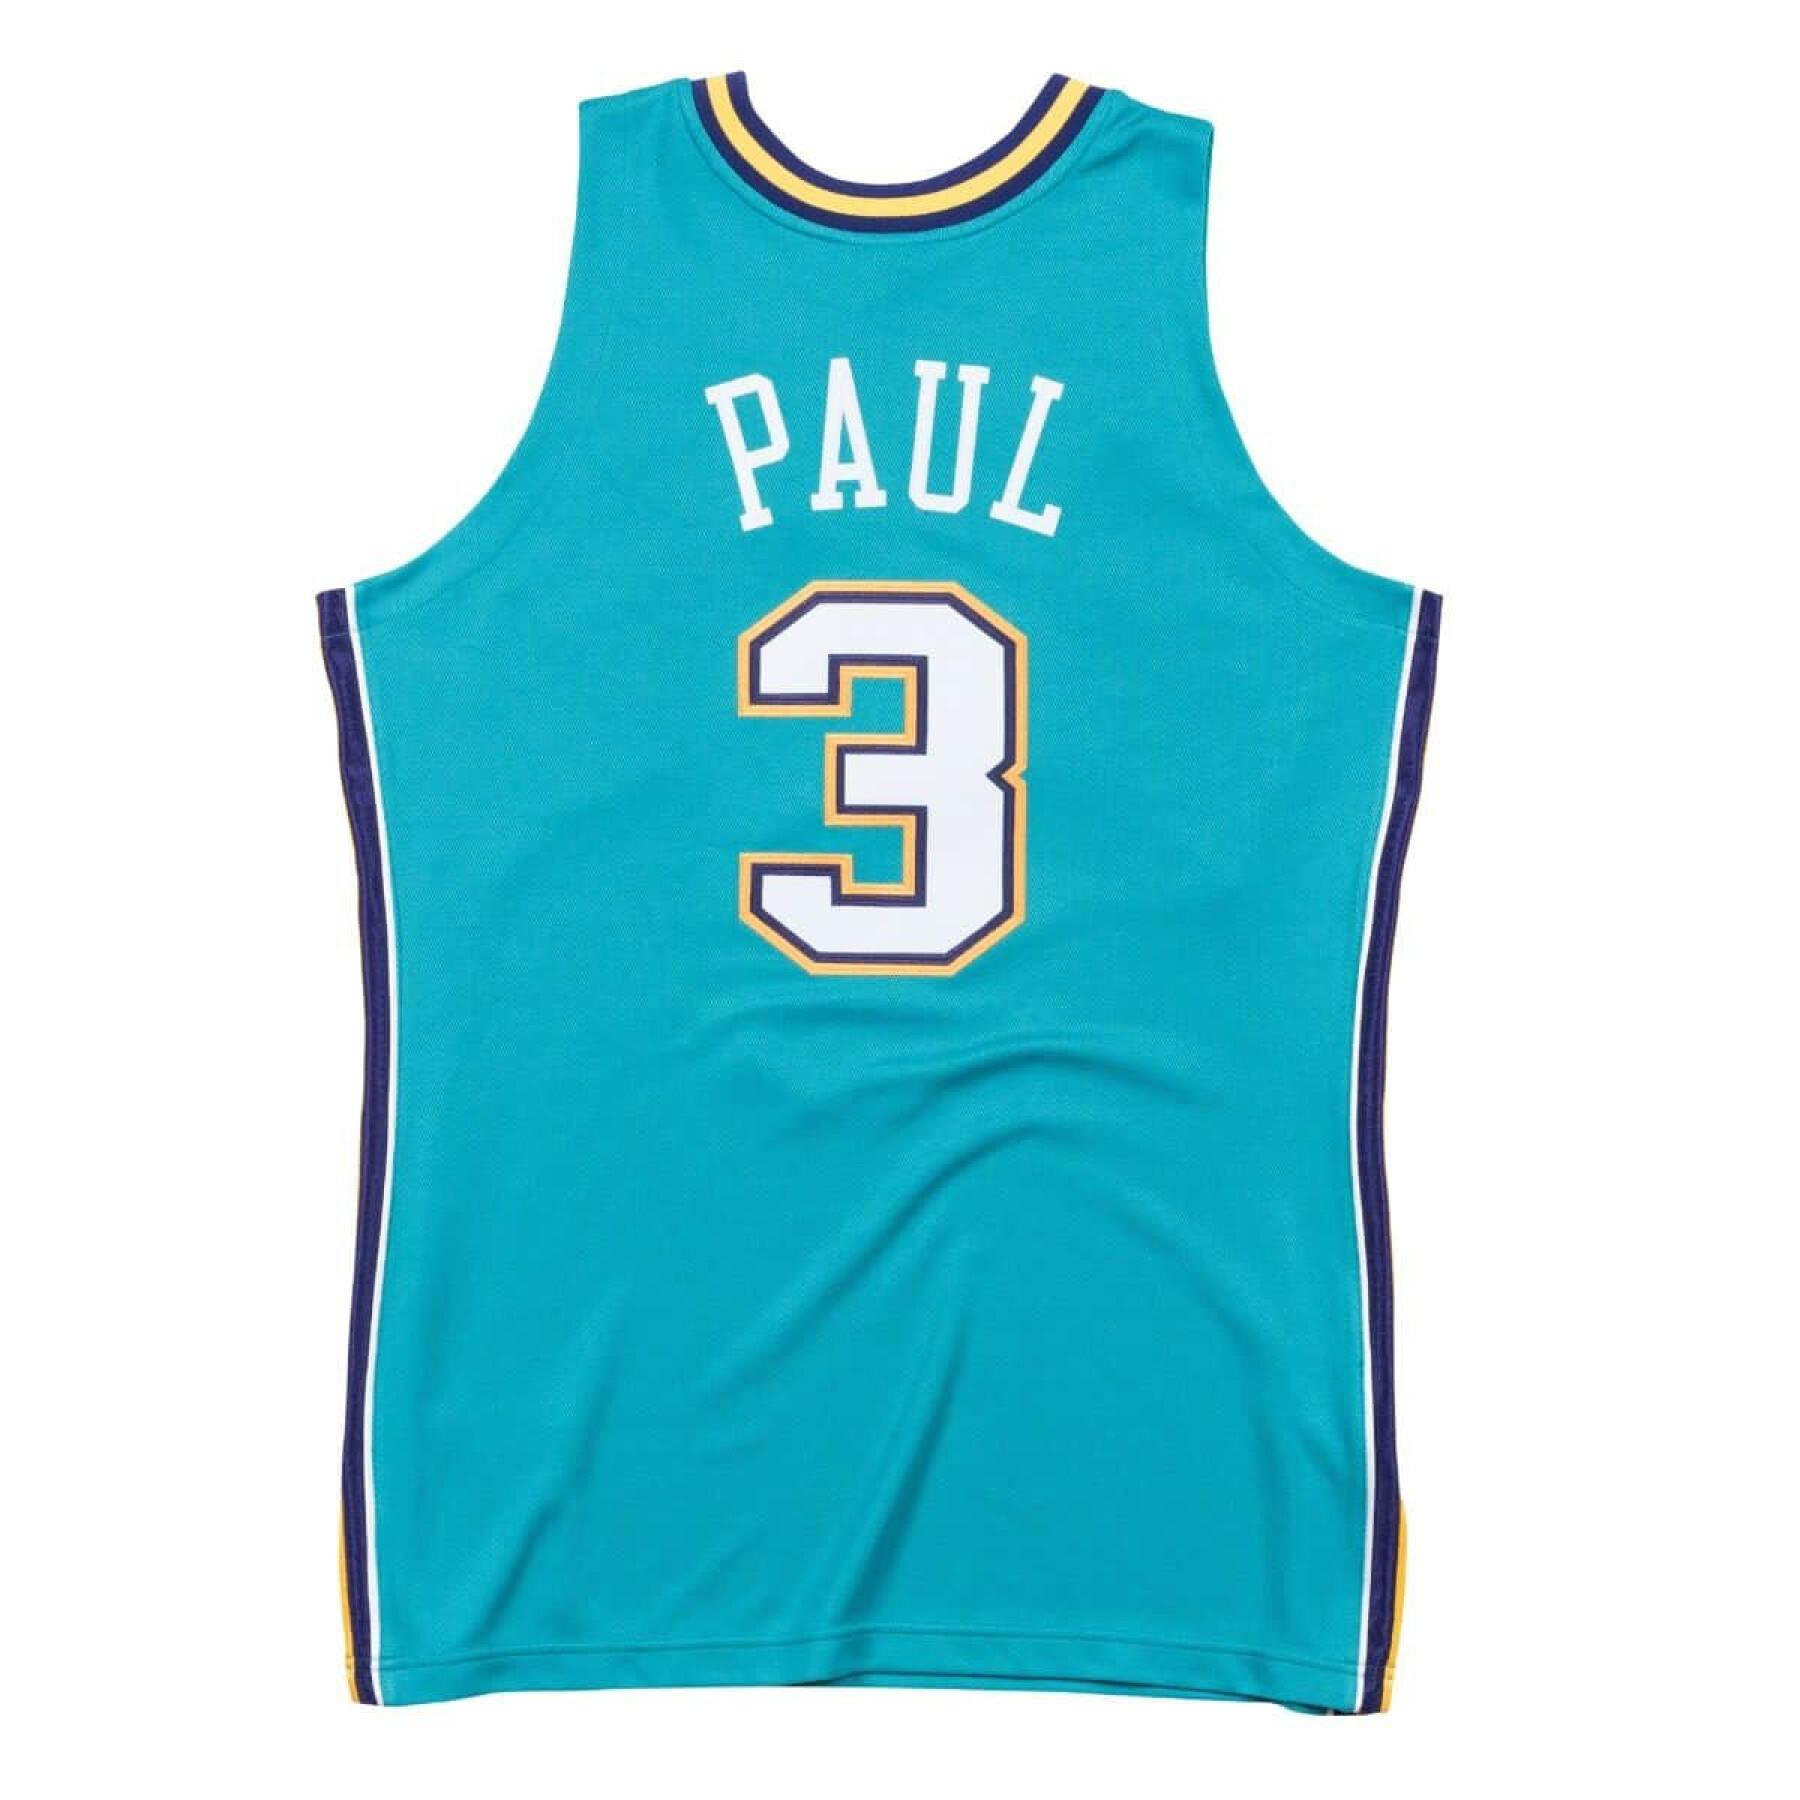 Authentic Jersey New Orleans Hornets Chris Paul 2005/06